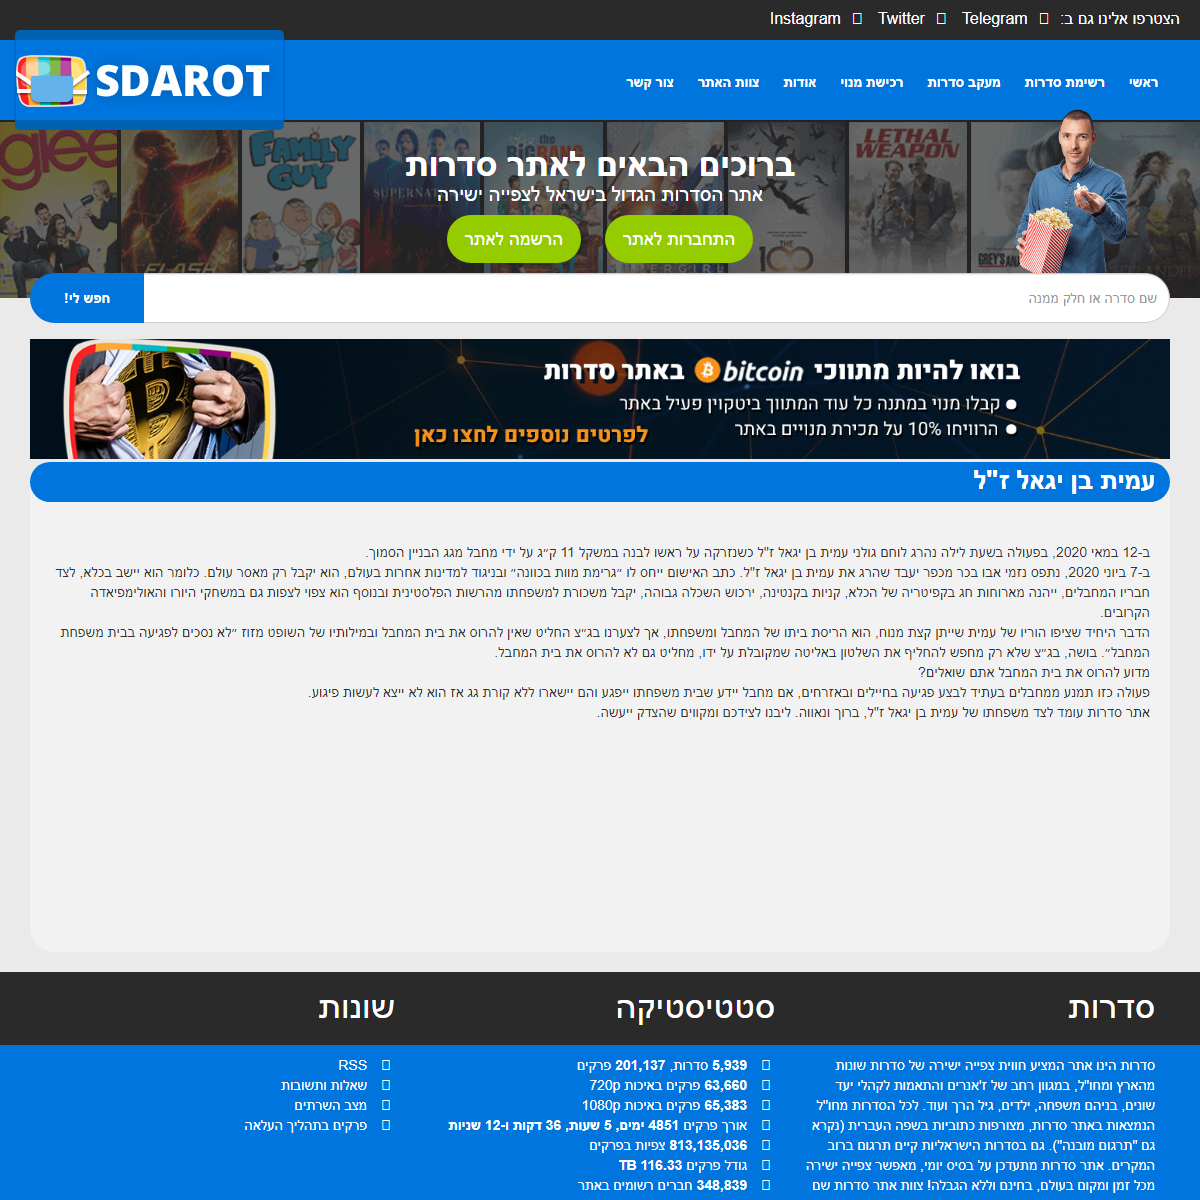 A complete backup of https://sdarot.world/content/AMITBENIGAL